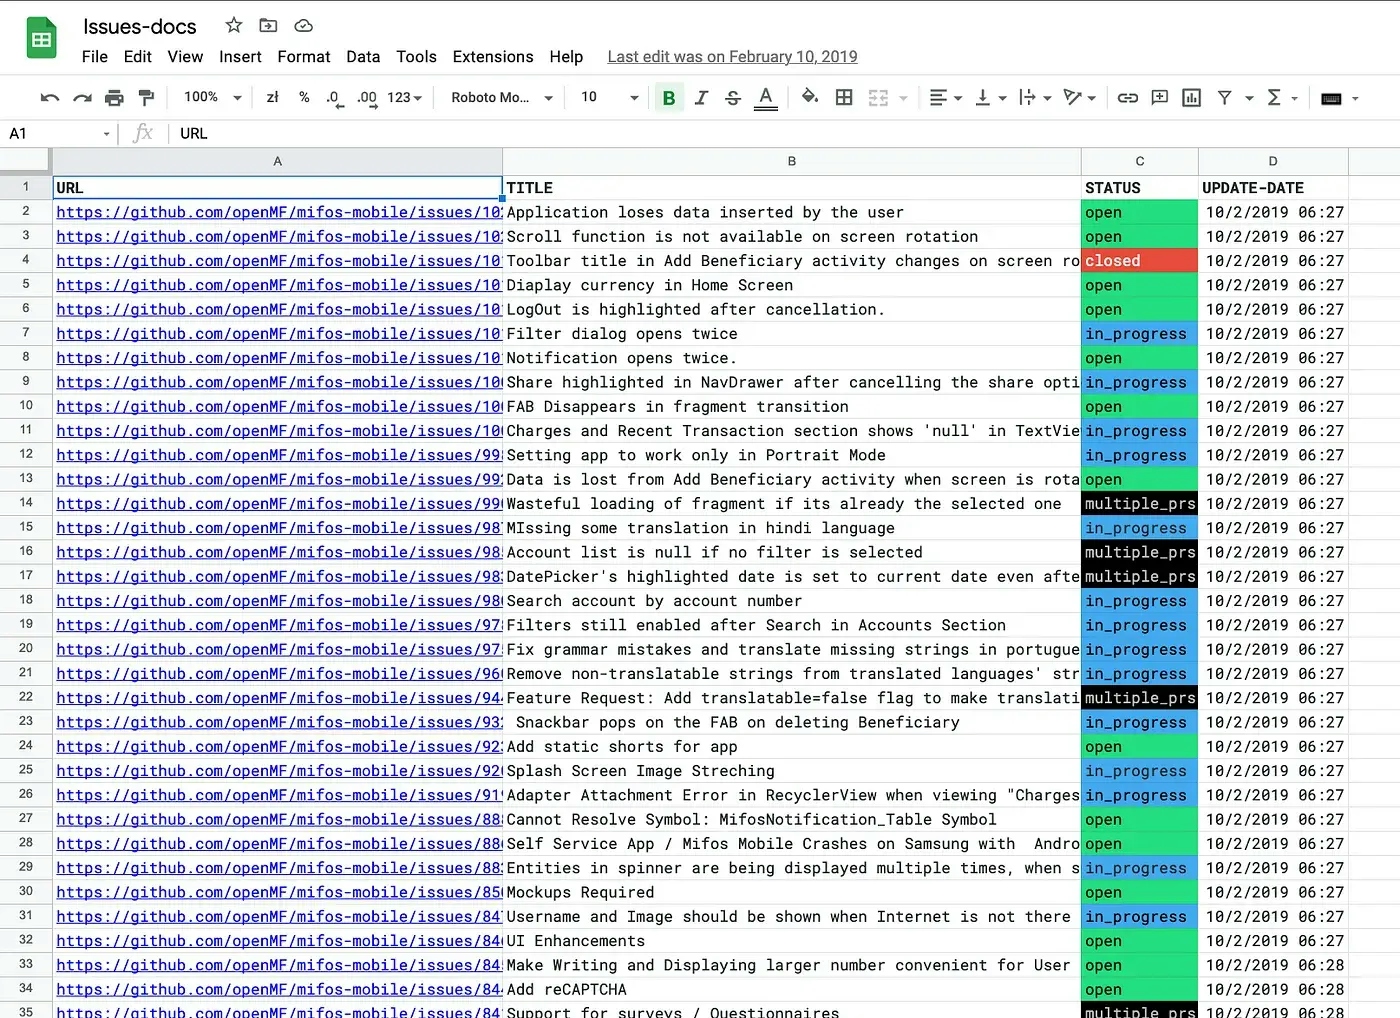 A Google Sheet document storing documentation of github issues with 4 columns: url, title, status, update-date.